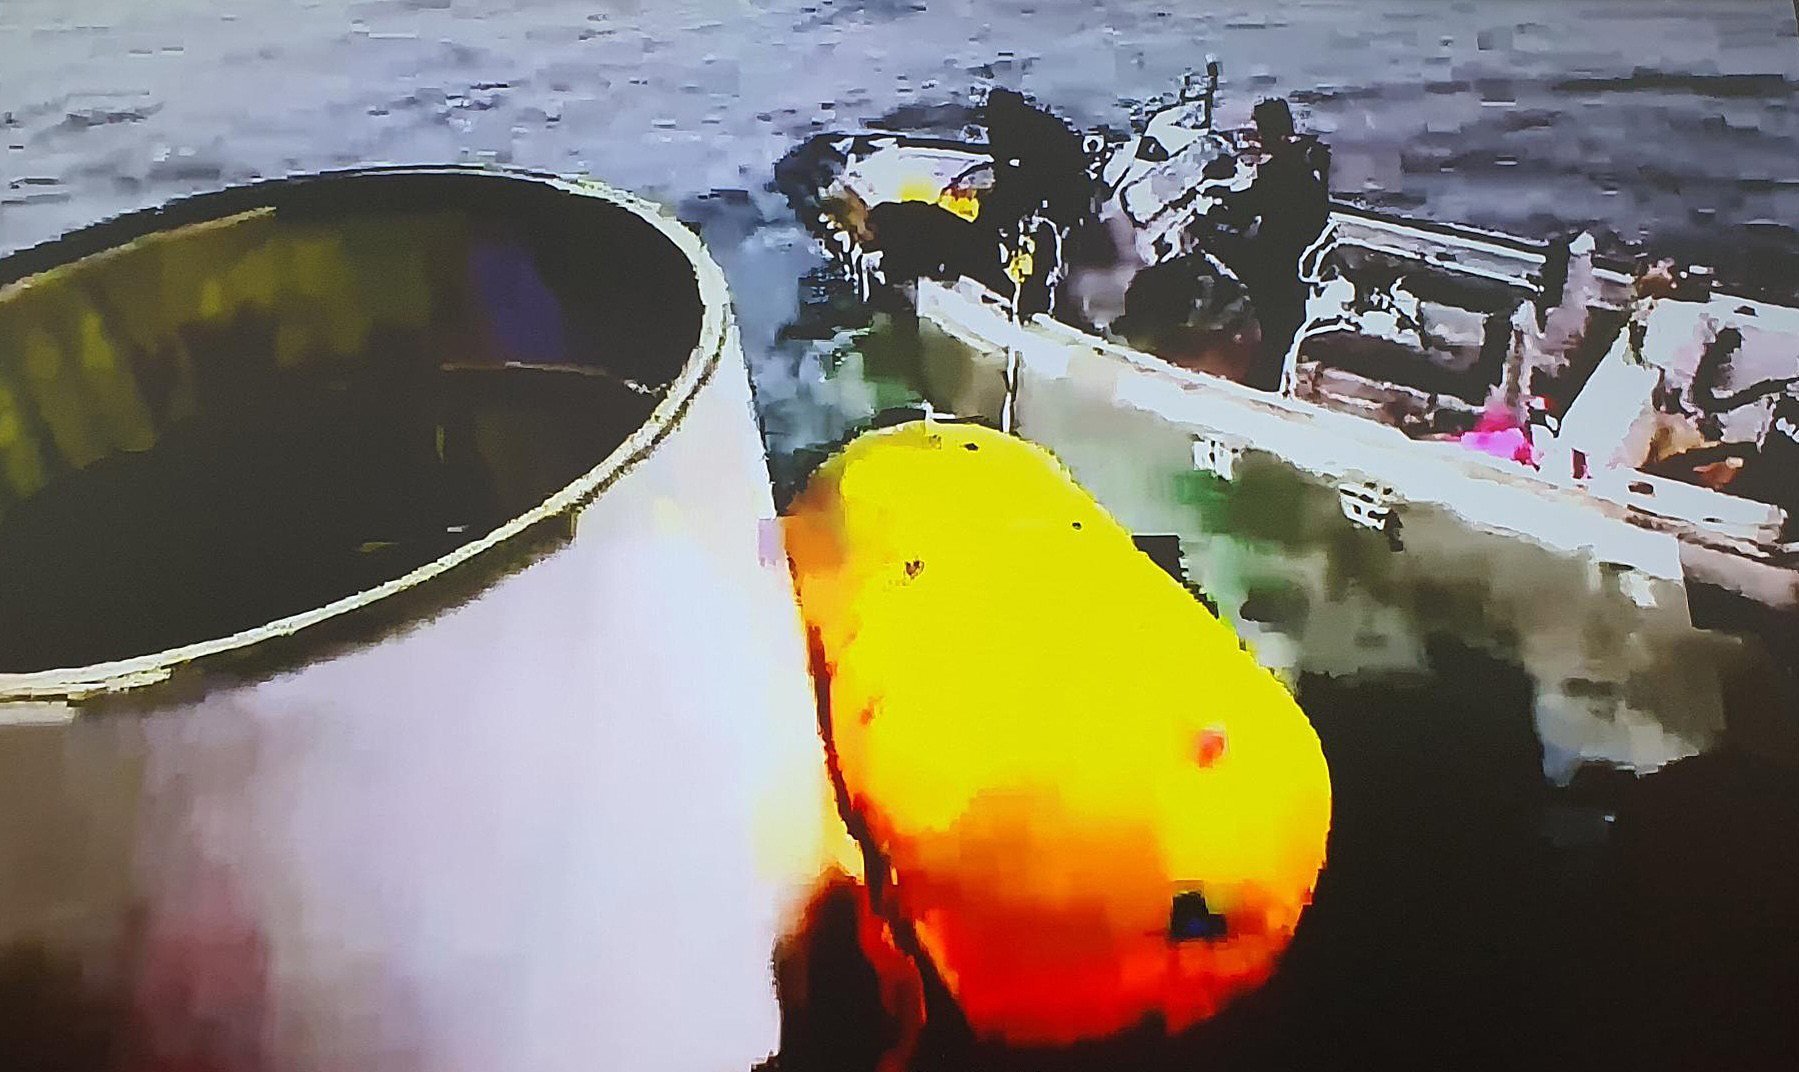 EOCHEONG-DO ISLAND, SOUTH KOREA - MAY 31: In this handout image released by the South Korean Defense Ministry, The object salvaged by South Korea's military that is presumed to be part of the North Korean space-launch vehicle that crashed into sea following a launch failure in waters off on May 31, 2023 in Eocheongdo Island South Korea. North Korea fired what it claims to be a "space launch vehicle" southward Wednesday, but it fell into the Yellow Sea after an "abnormal" flight, the South Korean military said, in a botched launch that defied international criticism and warnings.